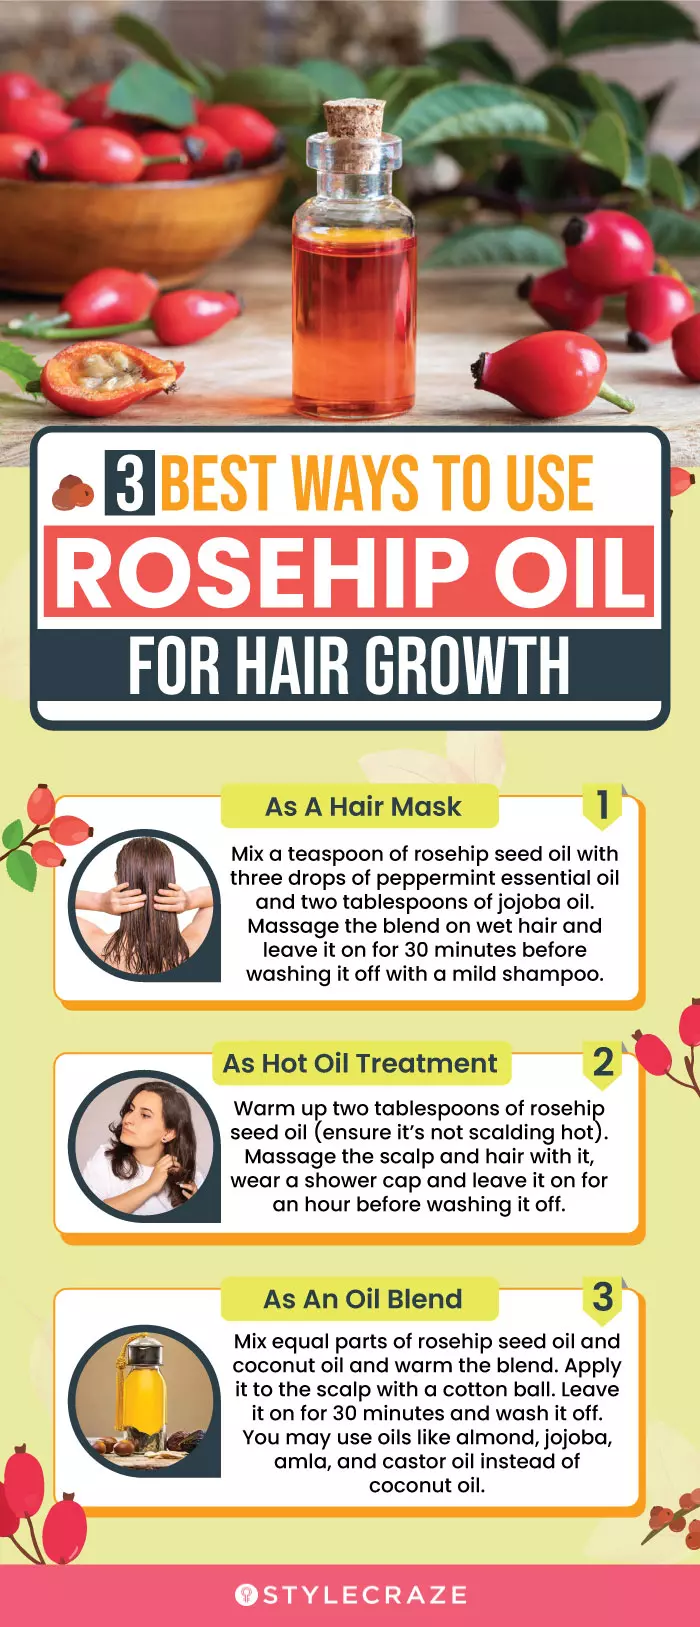 3 best ways to use rosehip oil for hair growth (infographic)